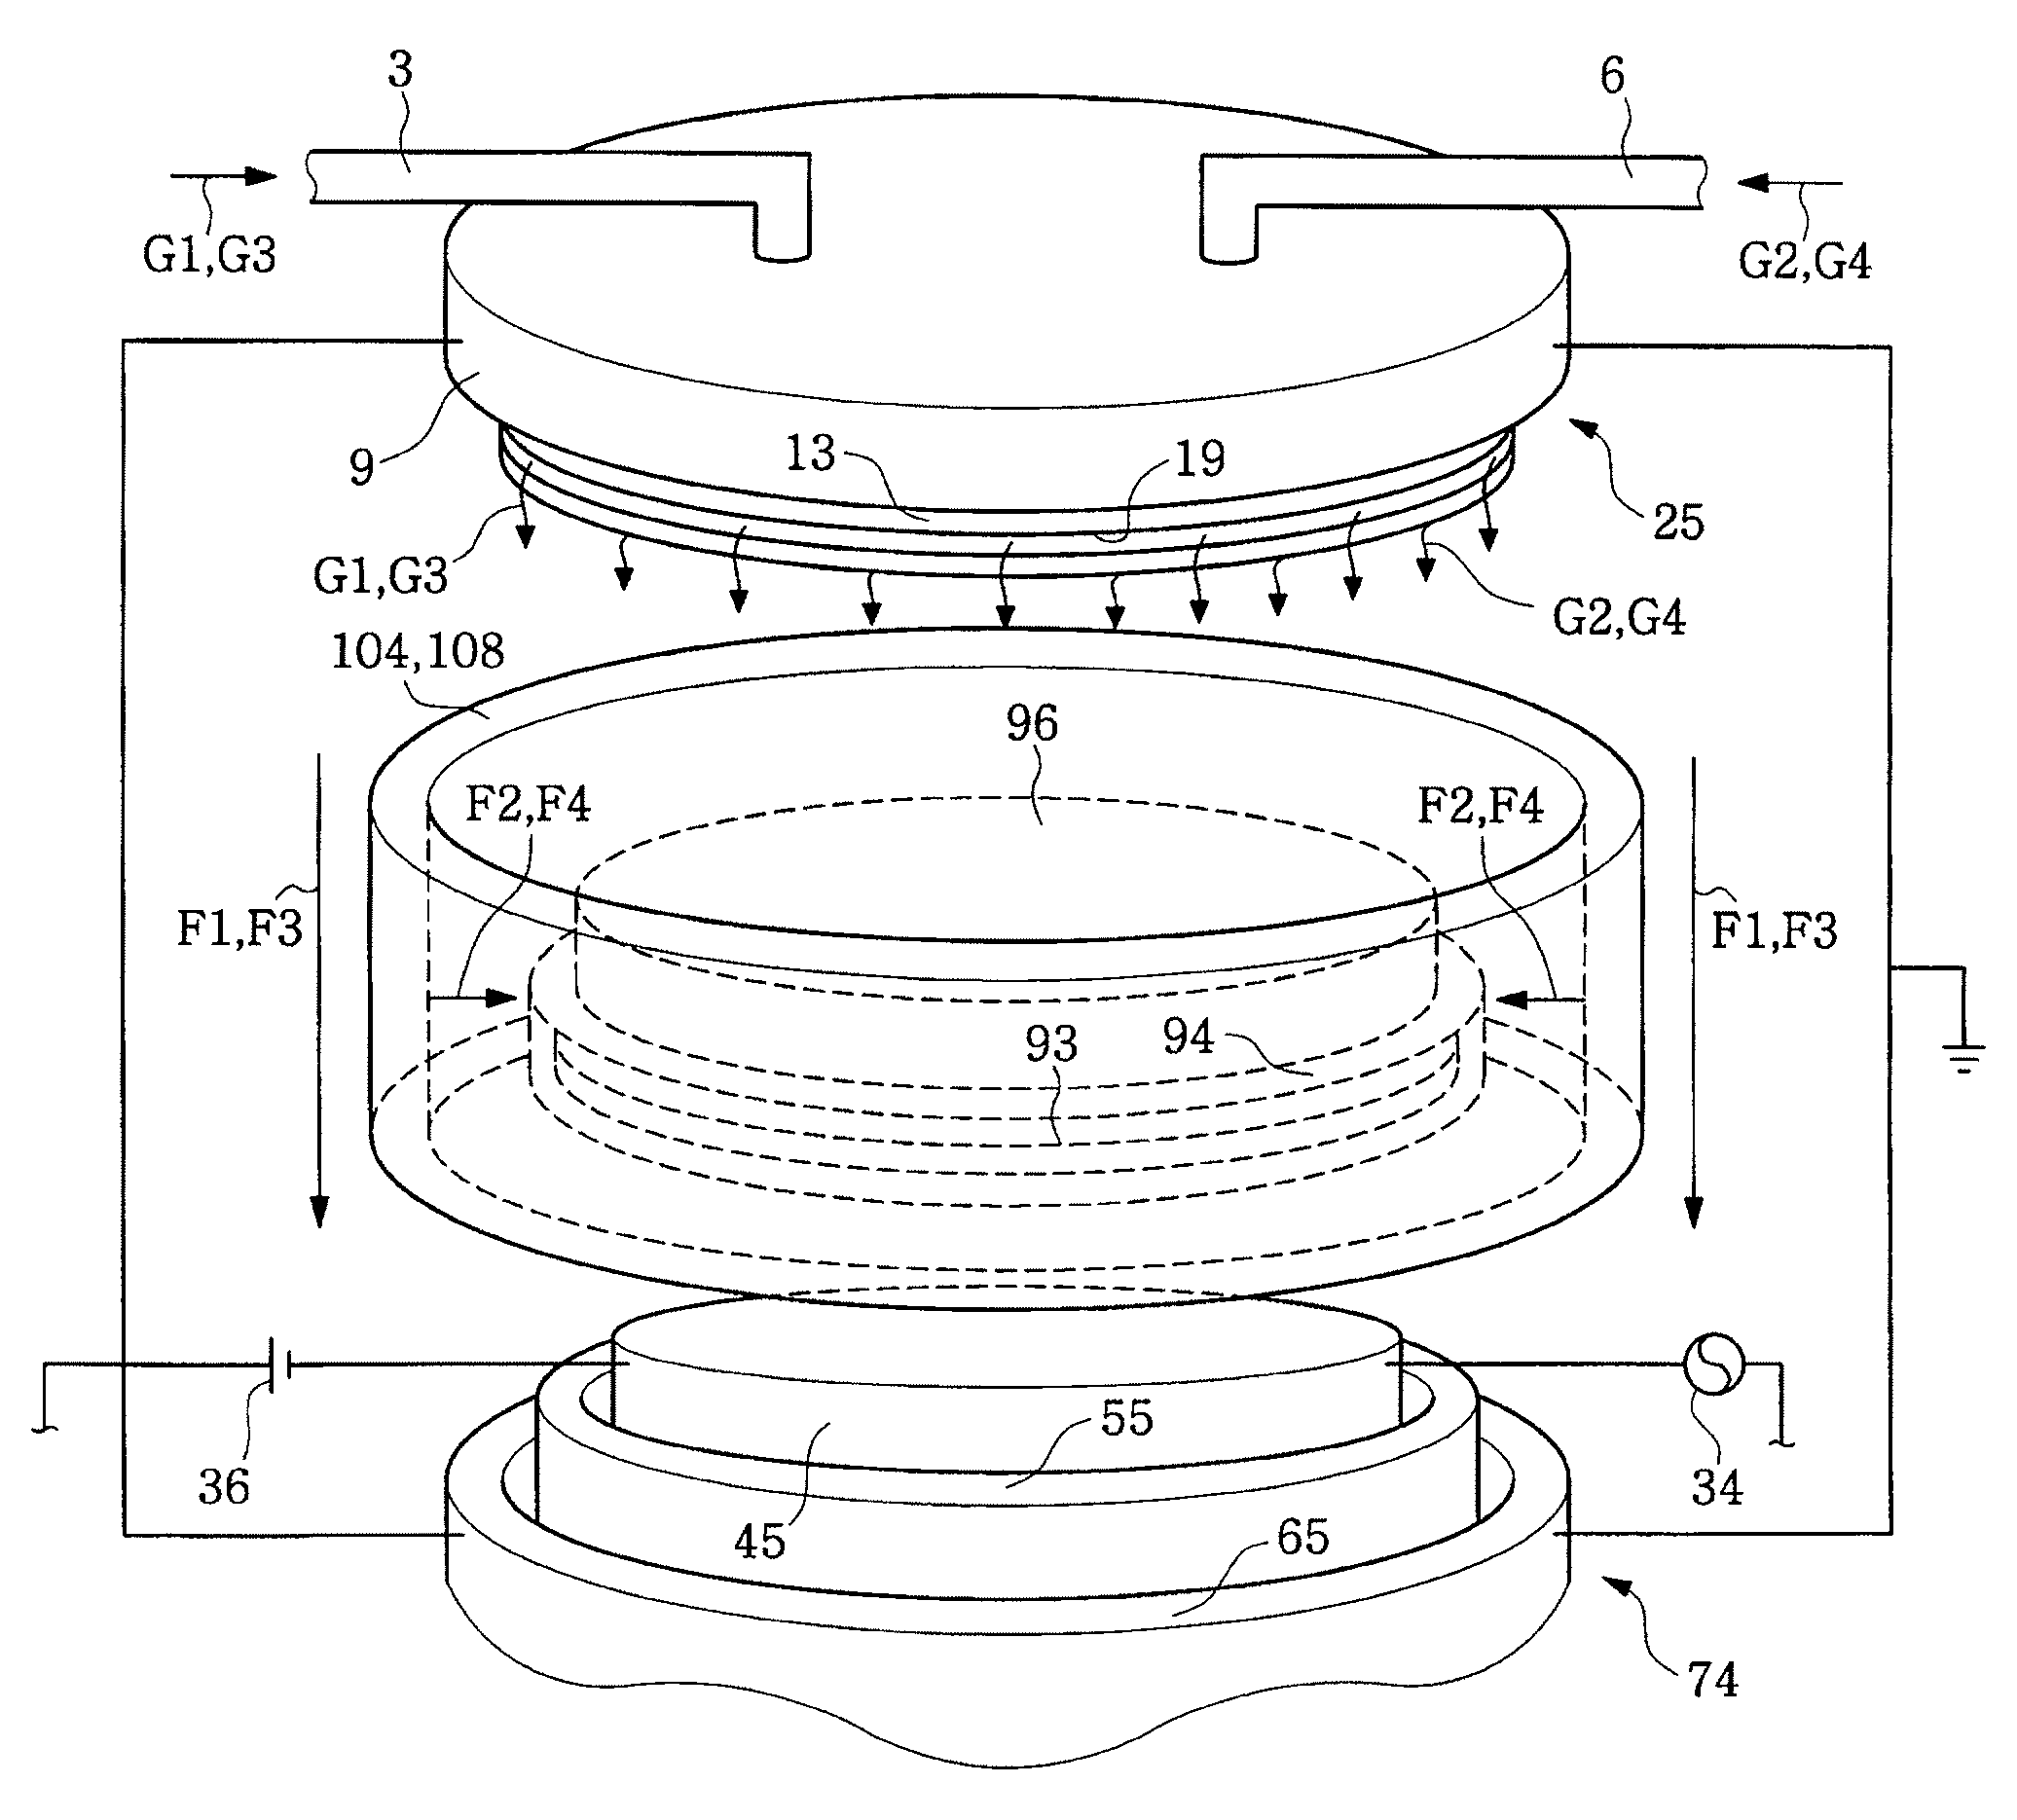 Semiconductor fabrication apparatuses to perform semiconductor etching and deposition processes and methods of forming semiconductor device using the same